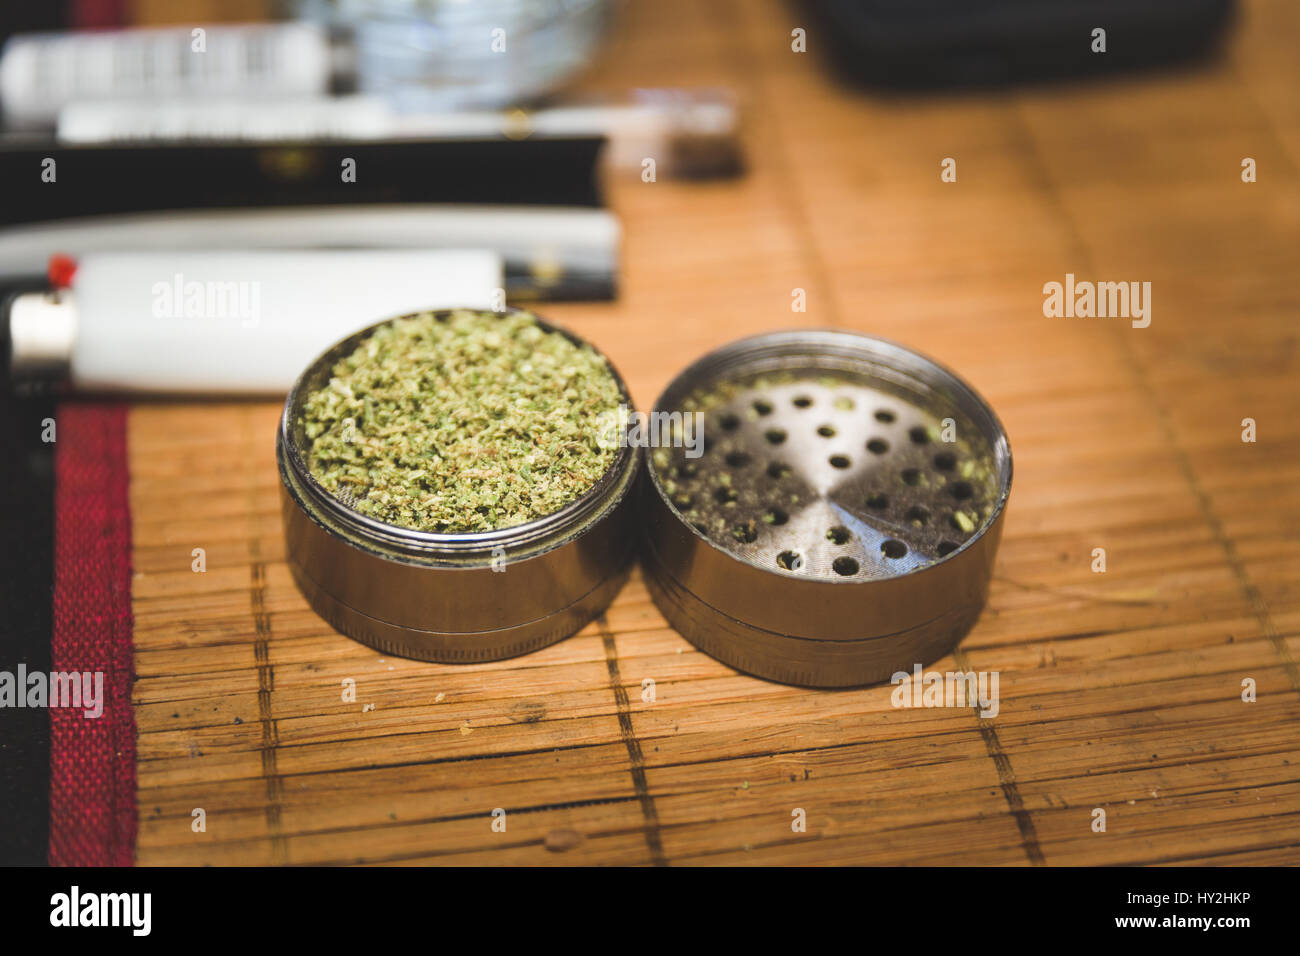 Steel or metal grinder full of freshly ground cannibus flower. Related smoking accessories nearby. Stock Photo